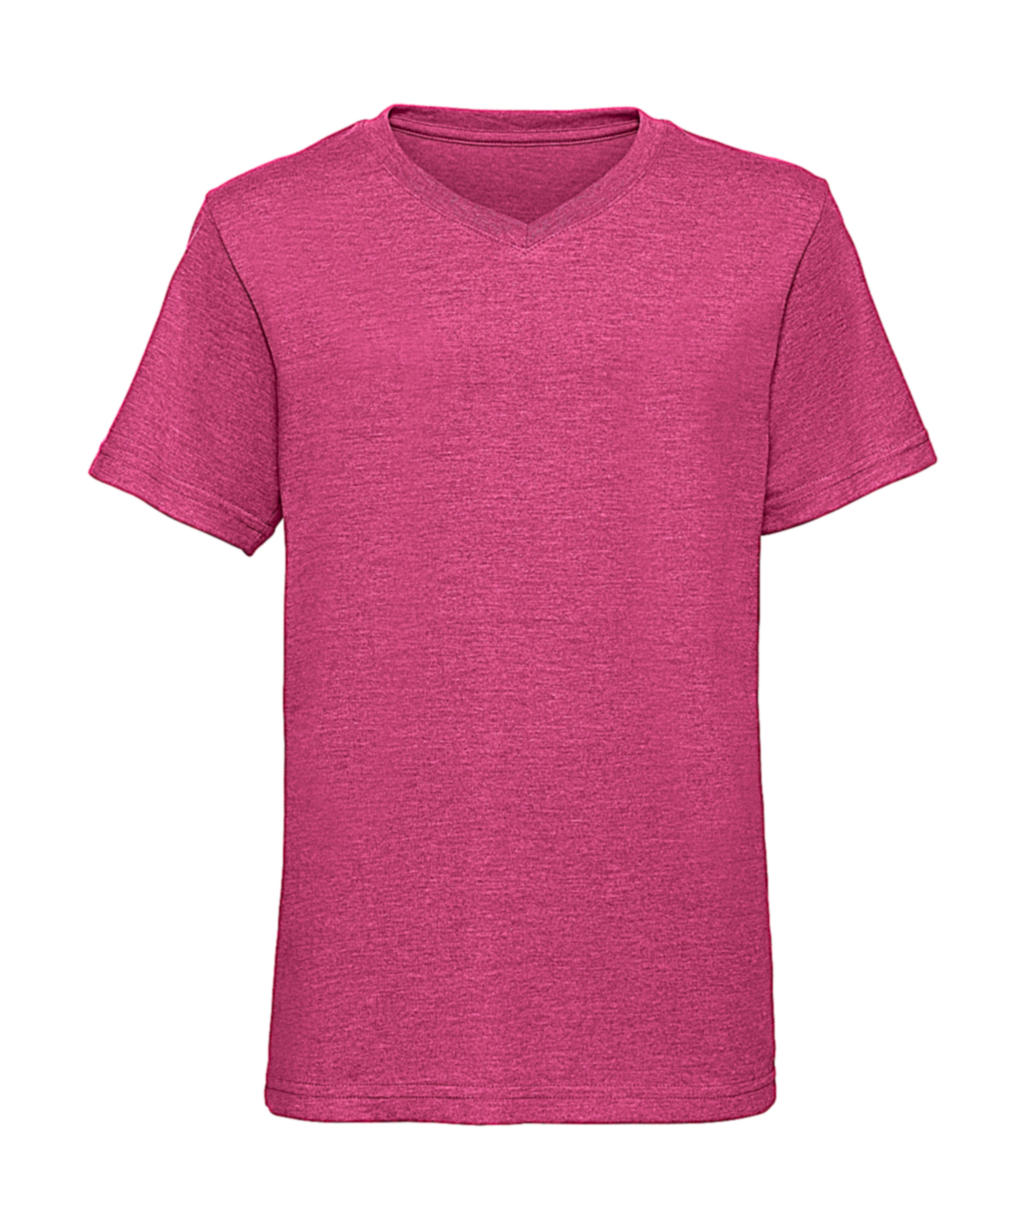  Boys V-Neck HD Tee in Farbe Pink Marl